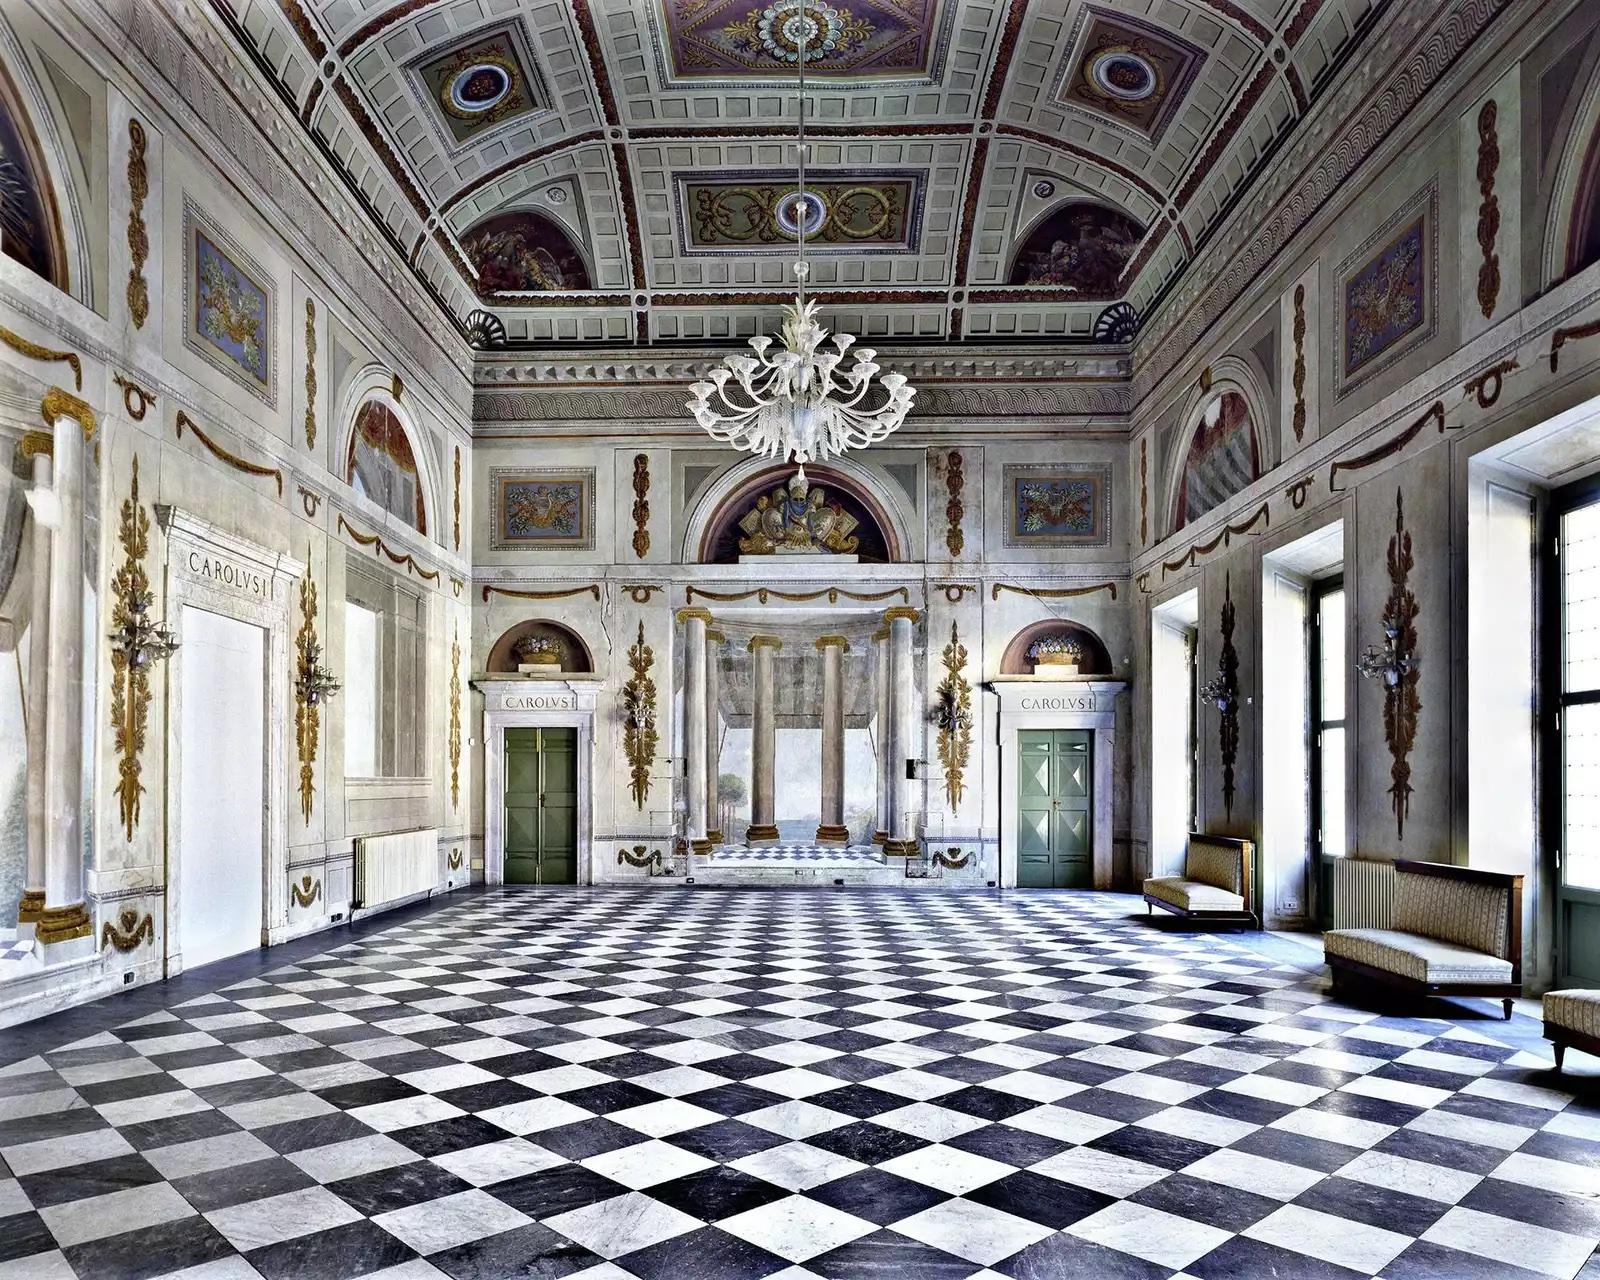 Palazzo Ducale, Massa, Italy, 1999
Chromogenic print
180 x 225 cm
Edition of 5

Italian, b. 1954, Florence, Italy, based in Florence, Italy Massimo Listri travels his native Italy and the world with his camera, photographing grand interior spaces